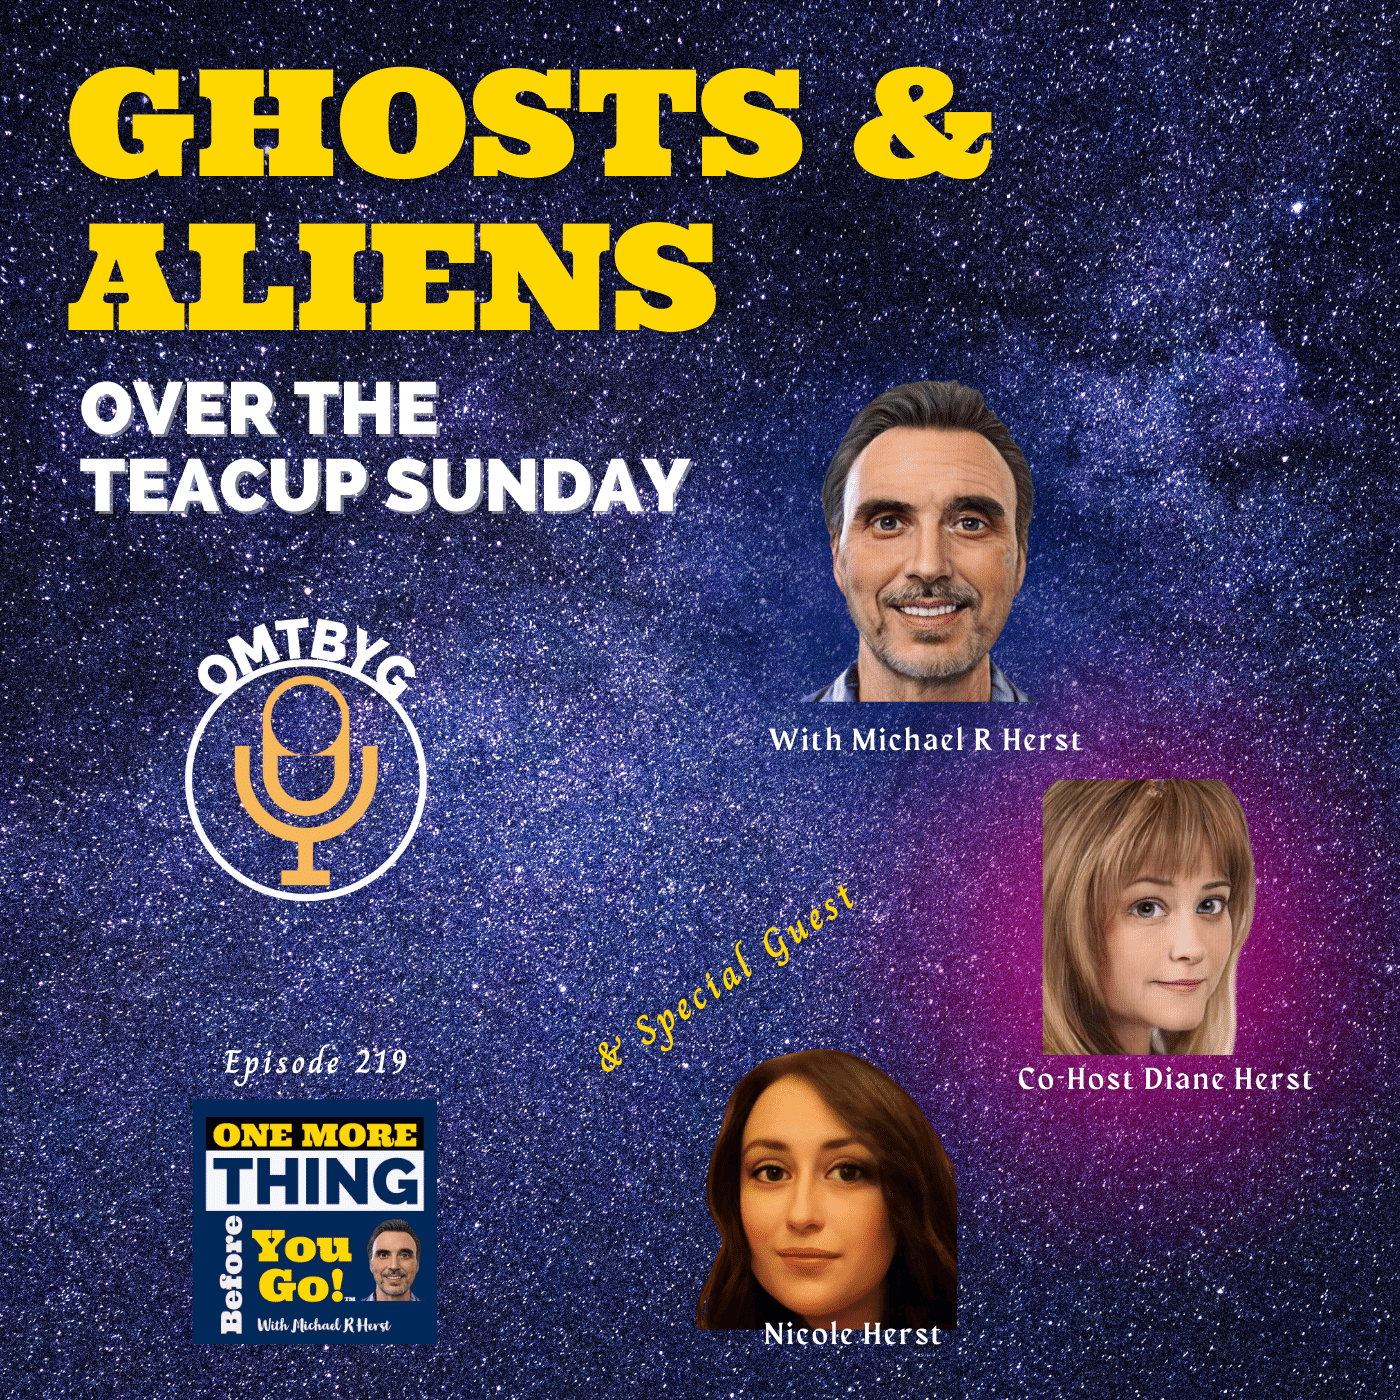 Ghosts & Aliens - Over the Teacup Sunday Image